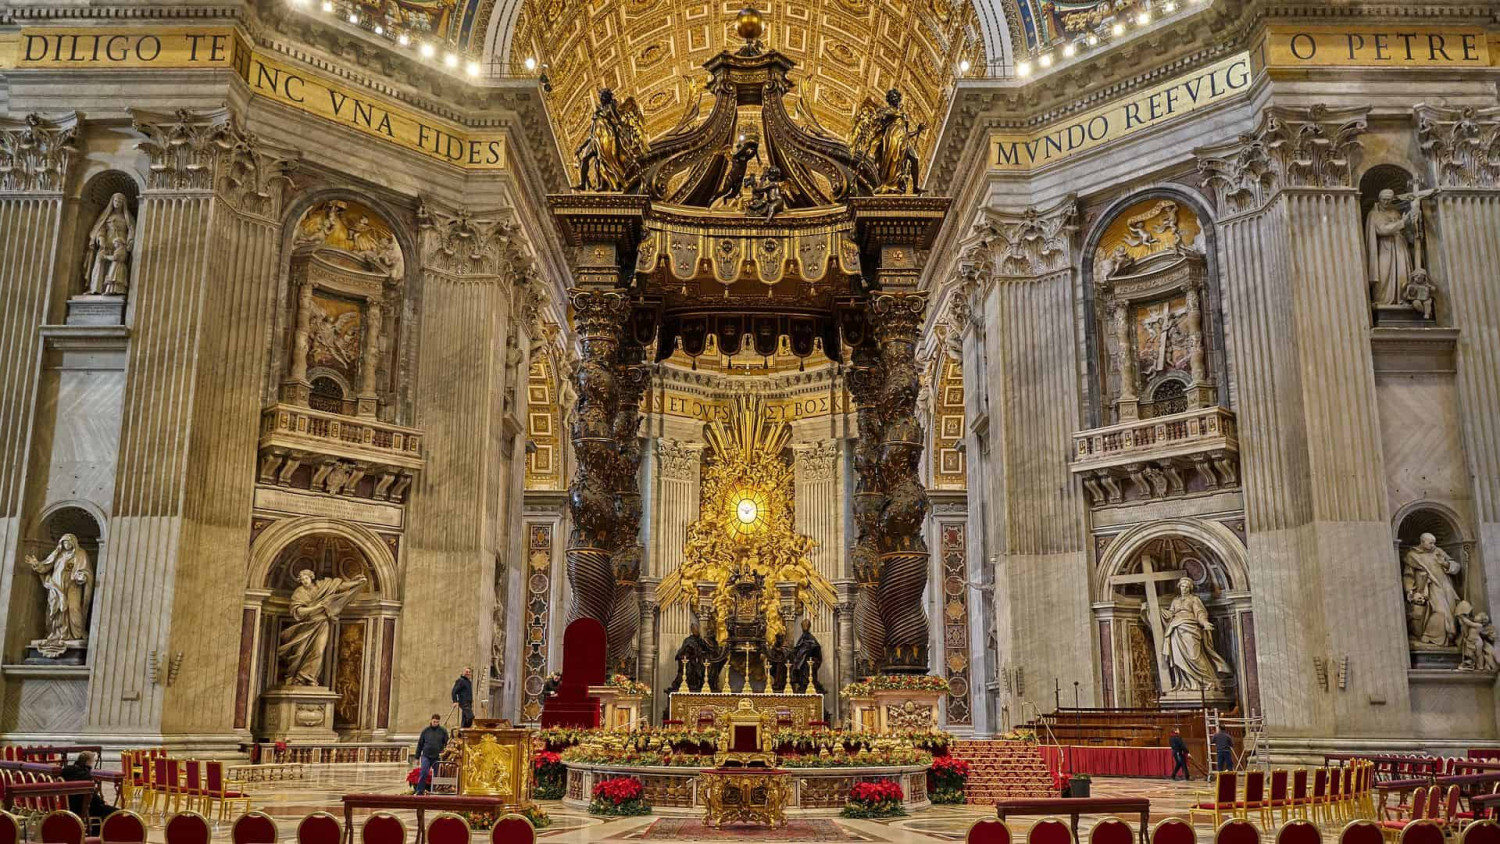 f alter of st peters basilica